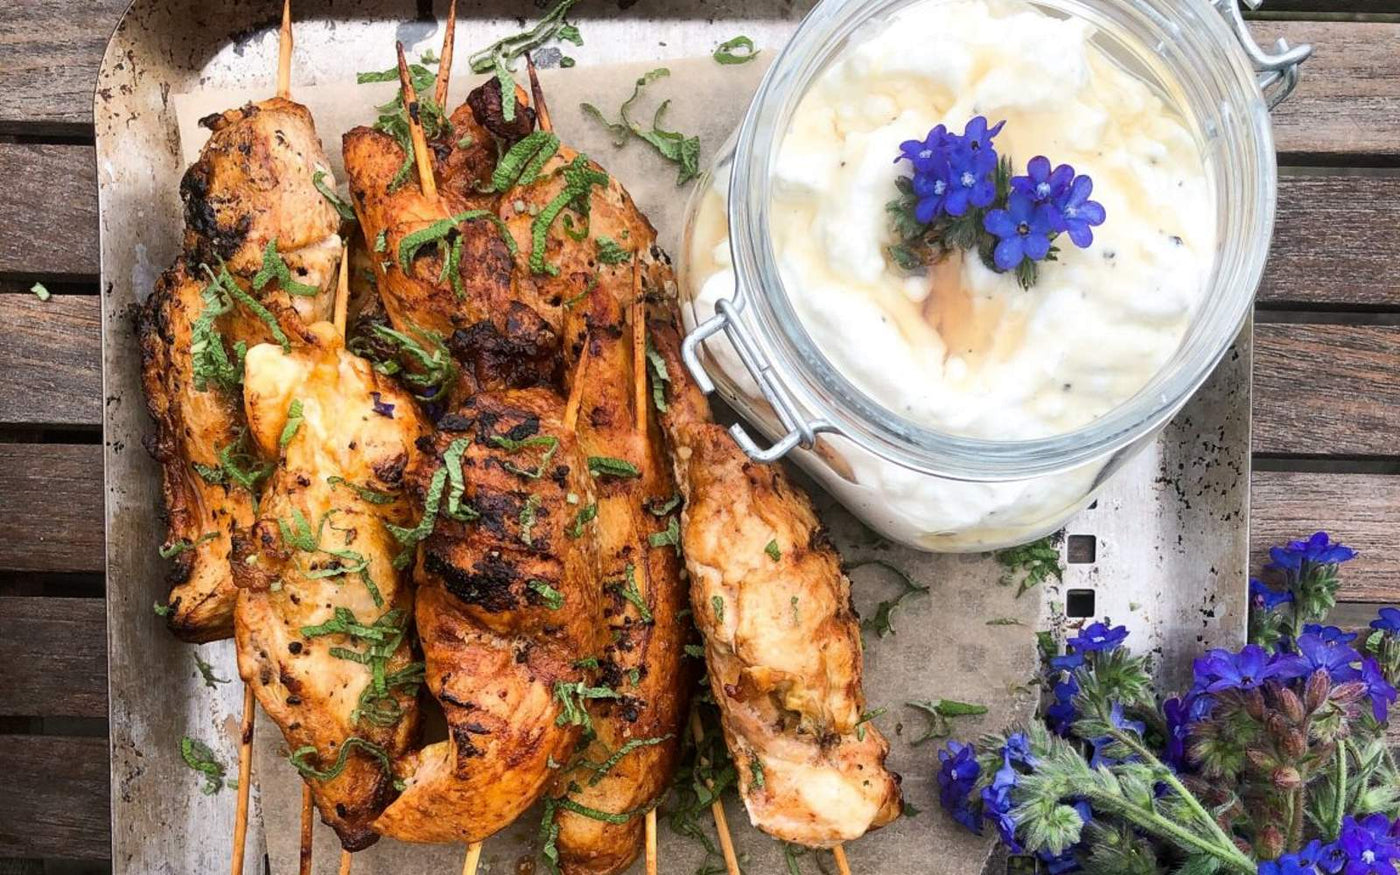 Liquorice Chili Chicken Skewers With a Feta Cheese Dip Recipe